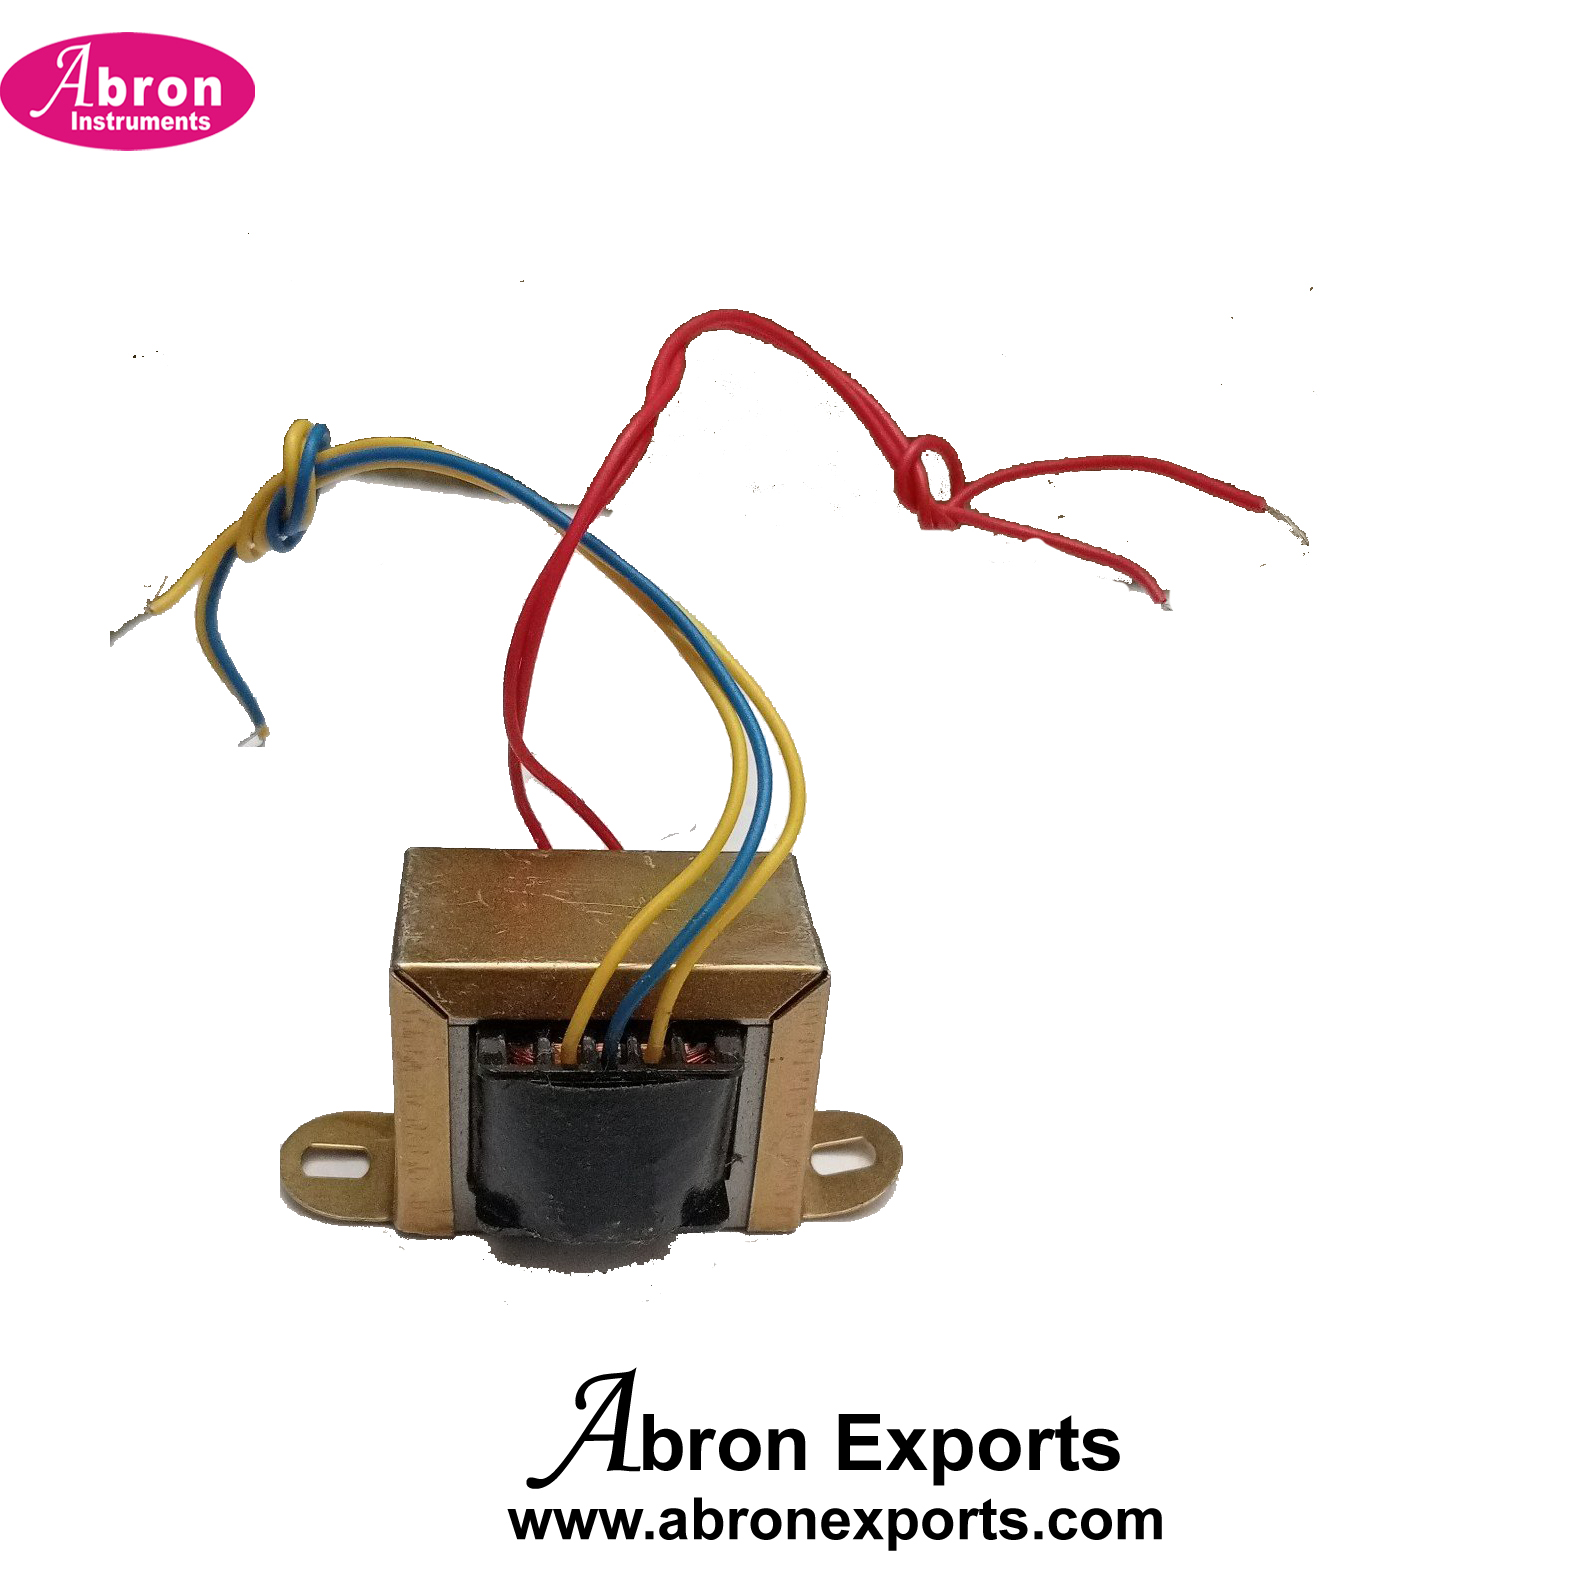 Electric Electronic Spare Transformer Small 50-100m Amp for Demo or SMPS Transformer Abron AE-1224TXS 